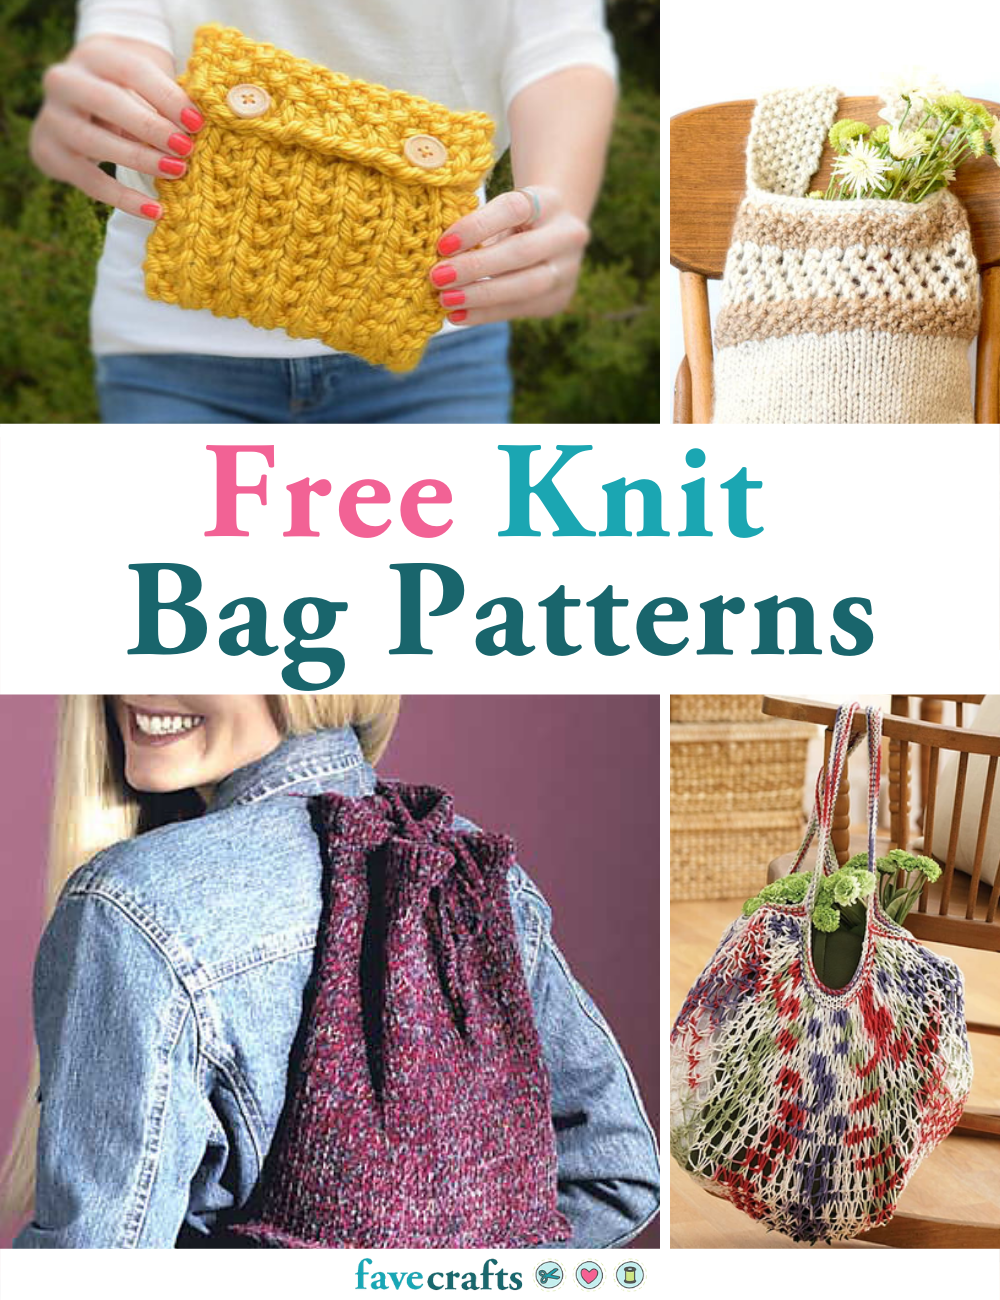 13 Free Vintage Knitting Patterns for Bags, Backpacks, and Purses ...